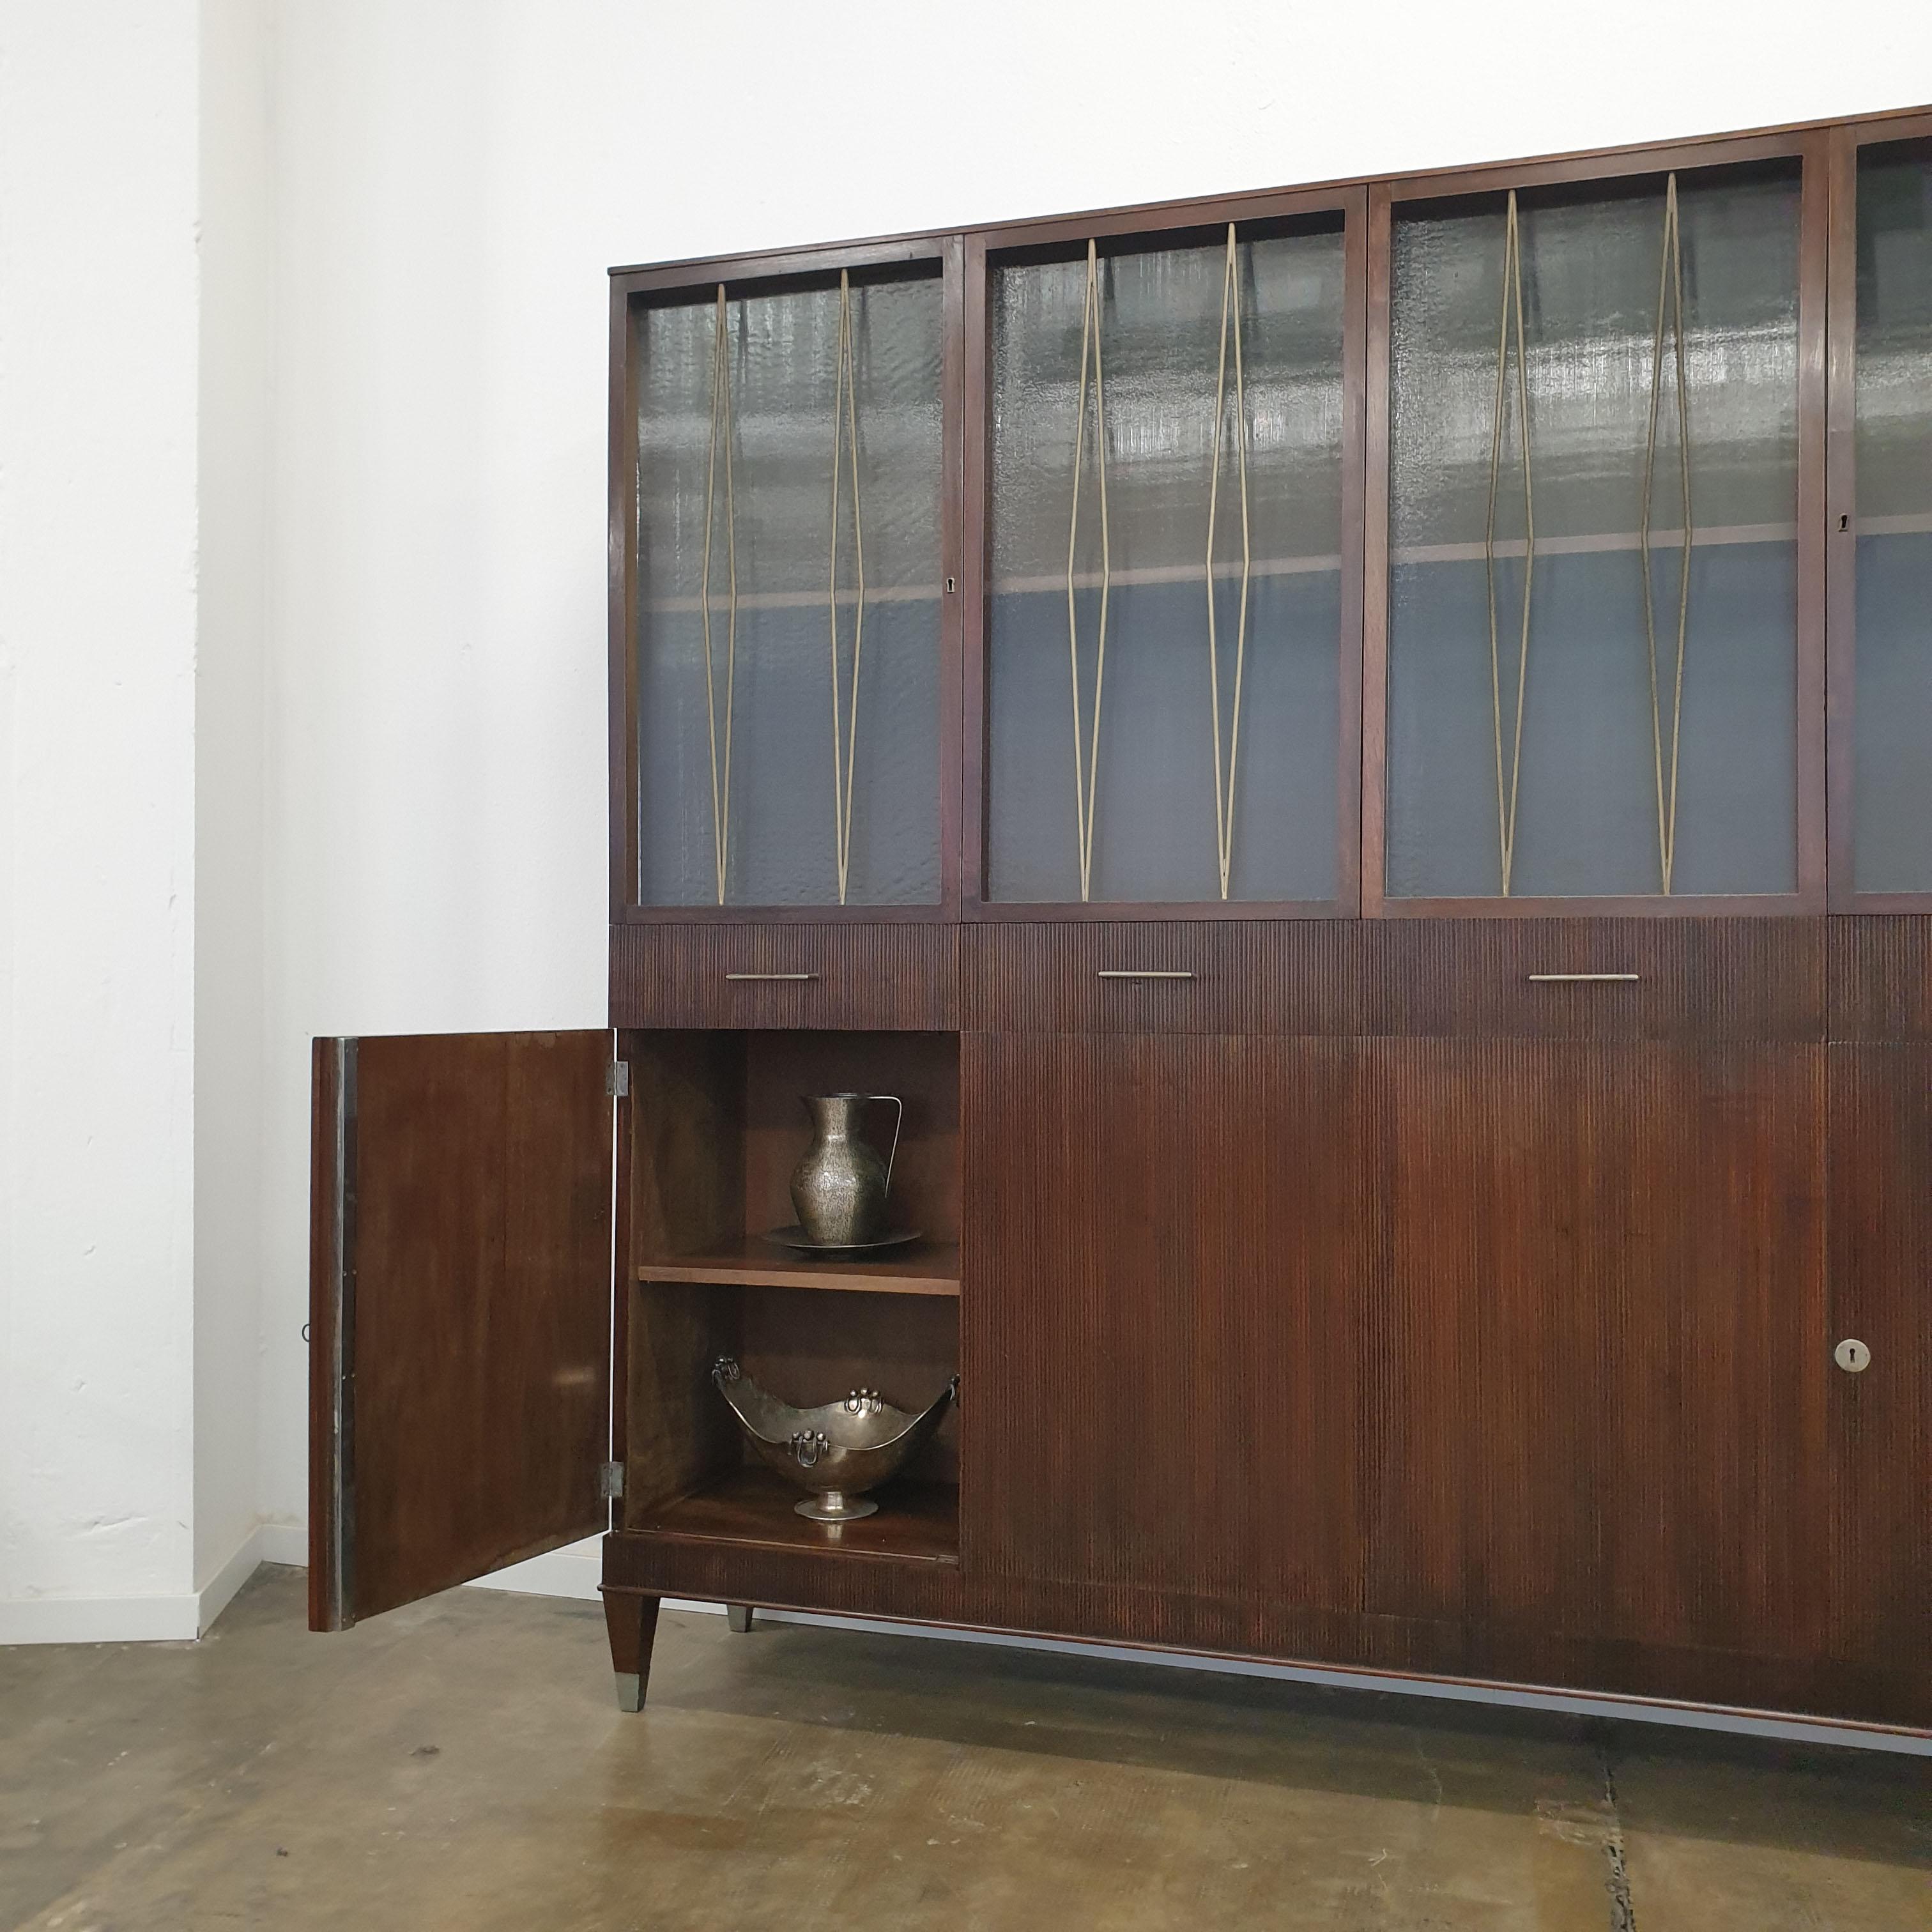 Architects Asnago & Vender Italian Rationalist Cabinet, Italy 1940s For Sale 1